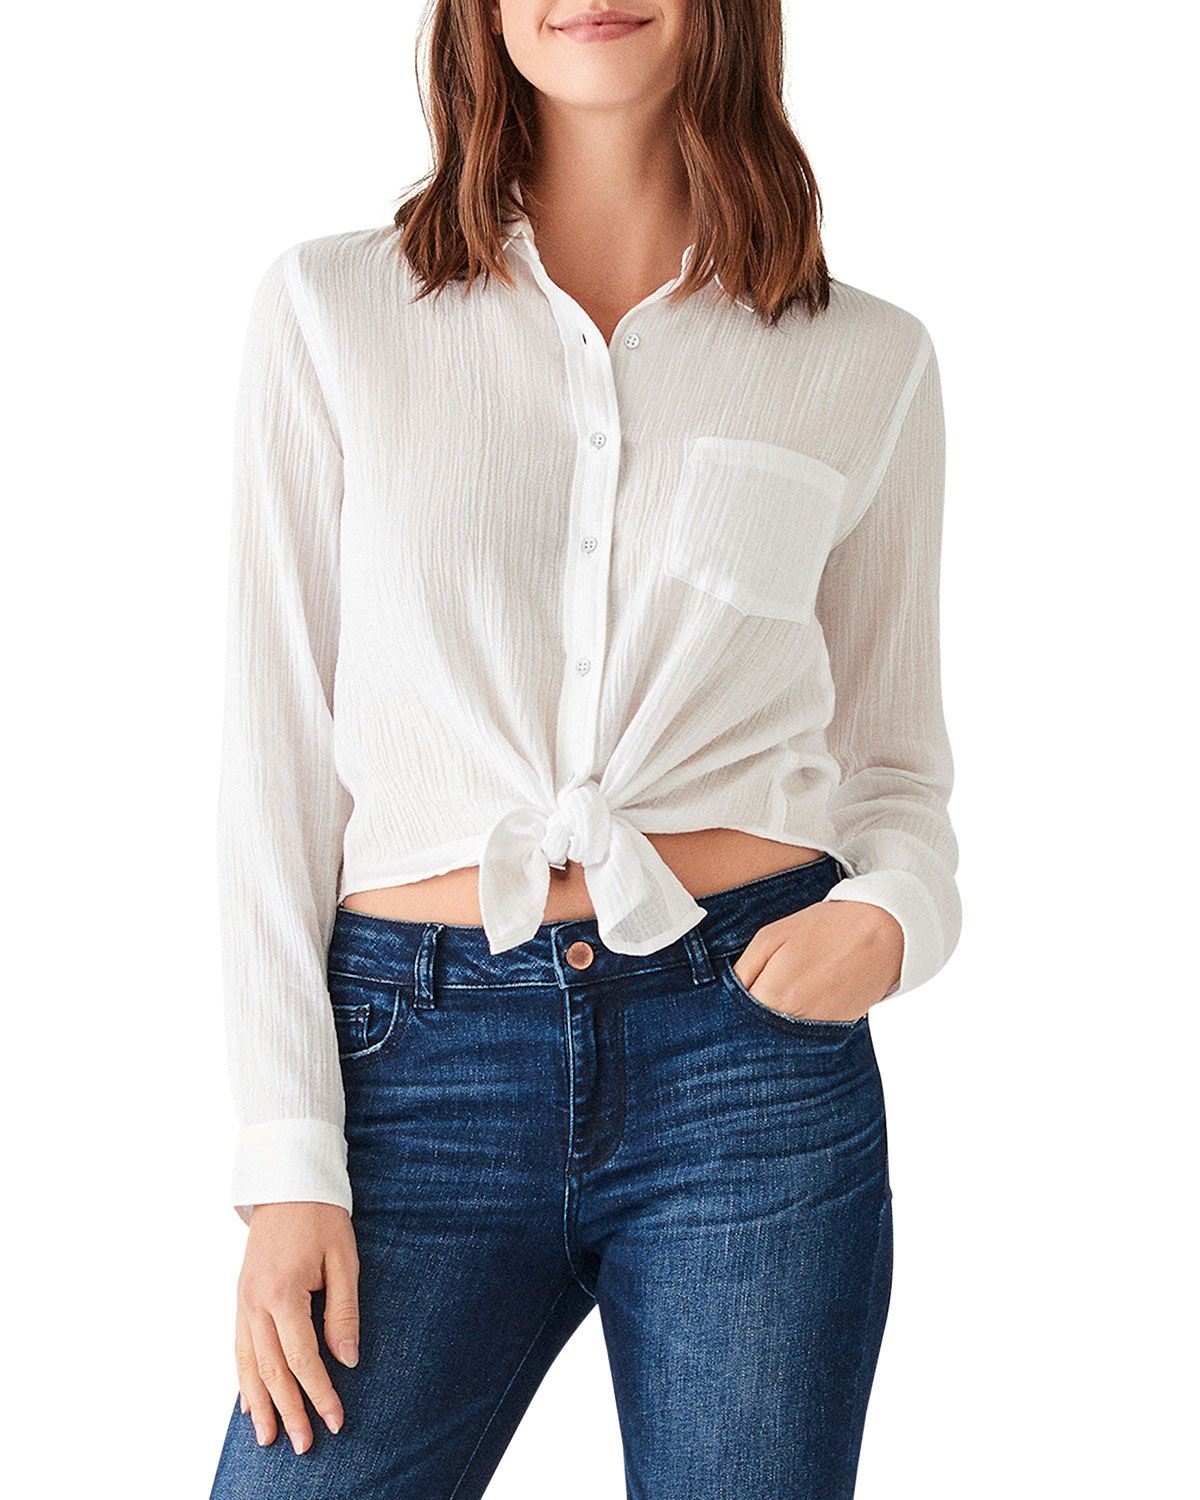 Mercer and Spring Top | Neiman Marcus